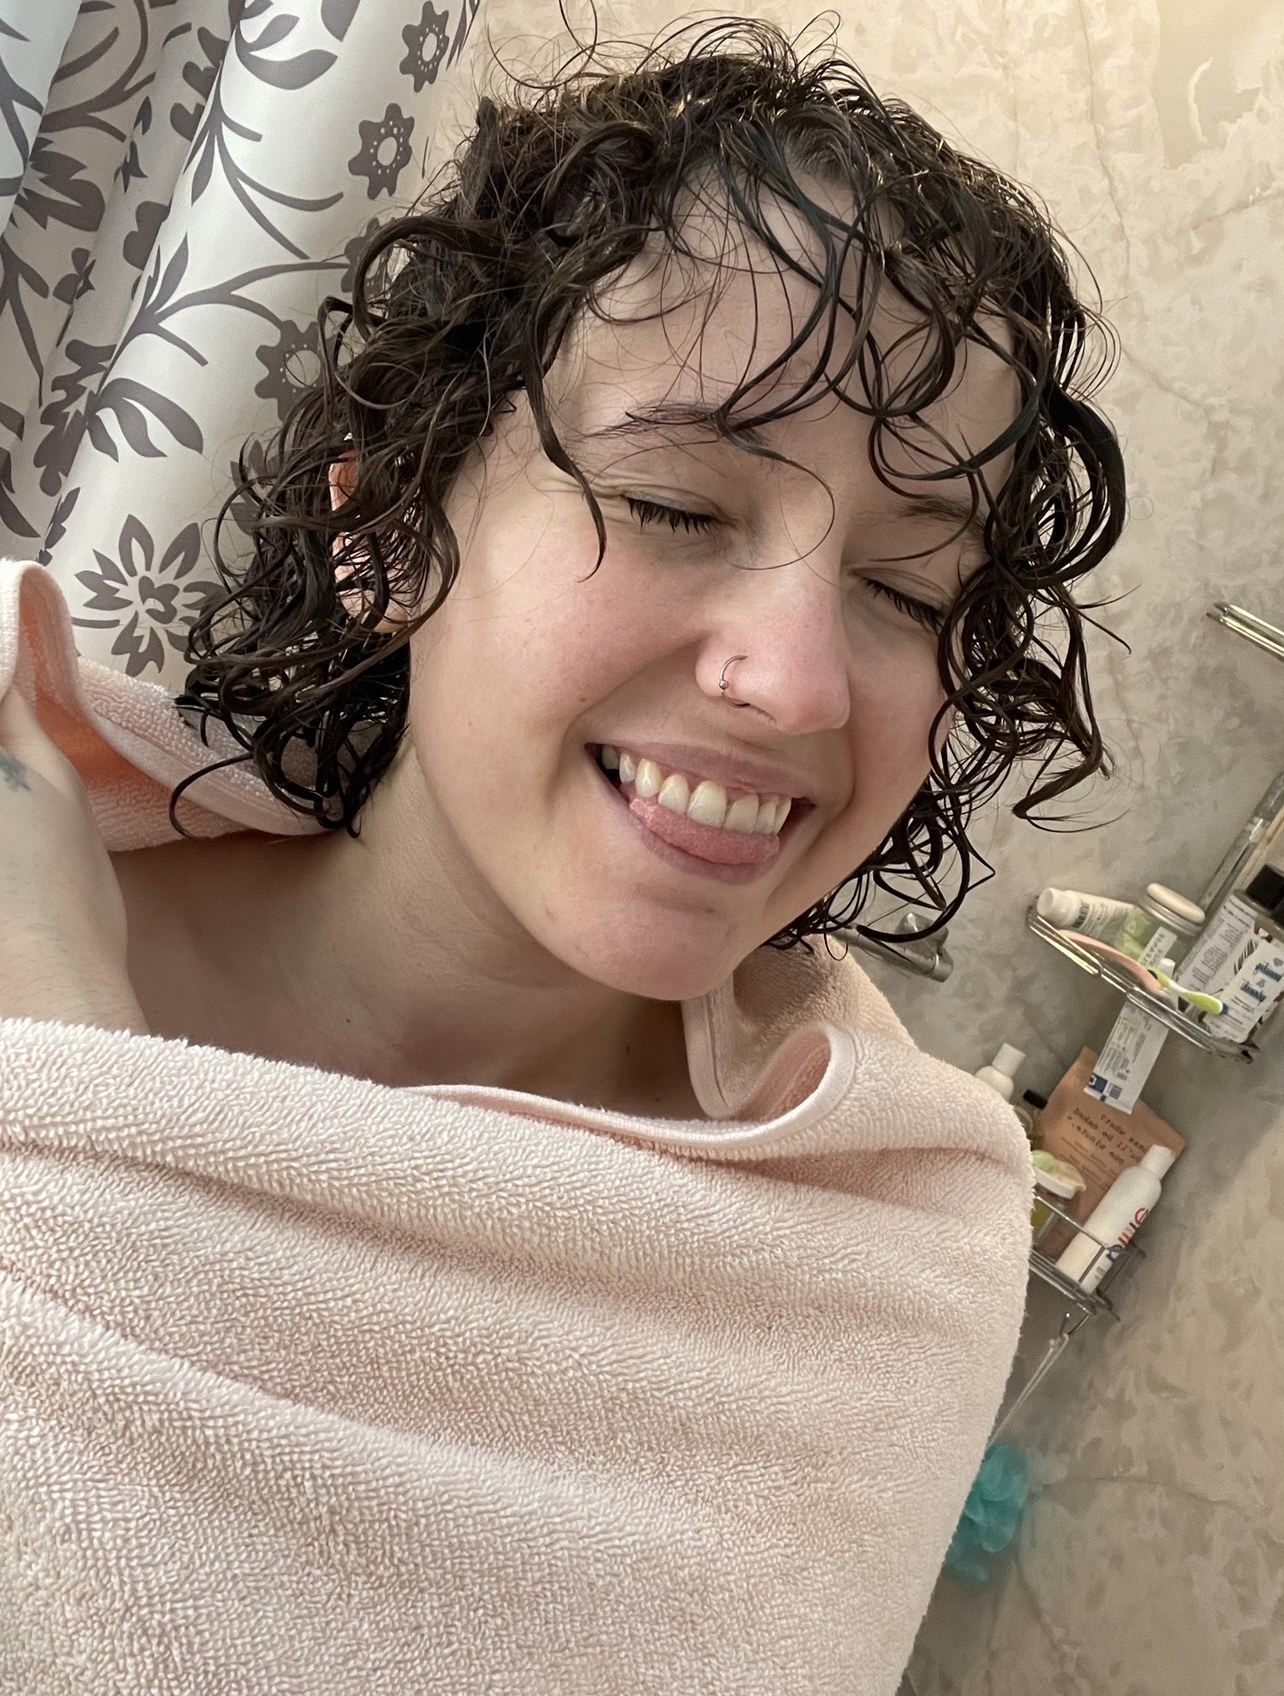 A person smiling in a pink towel